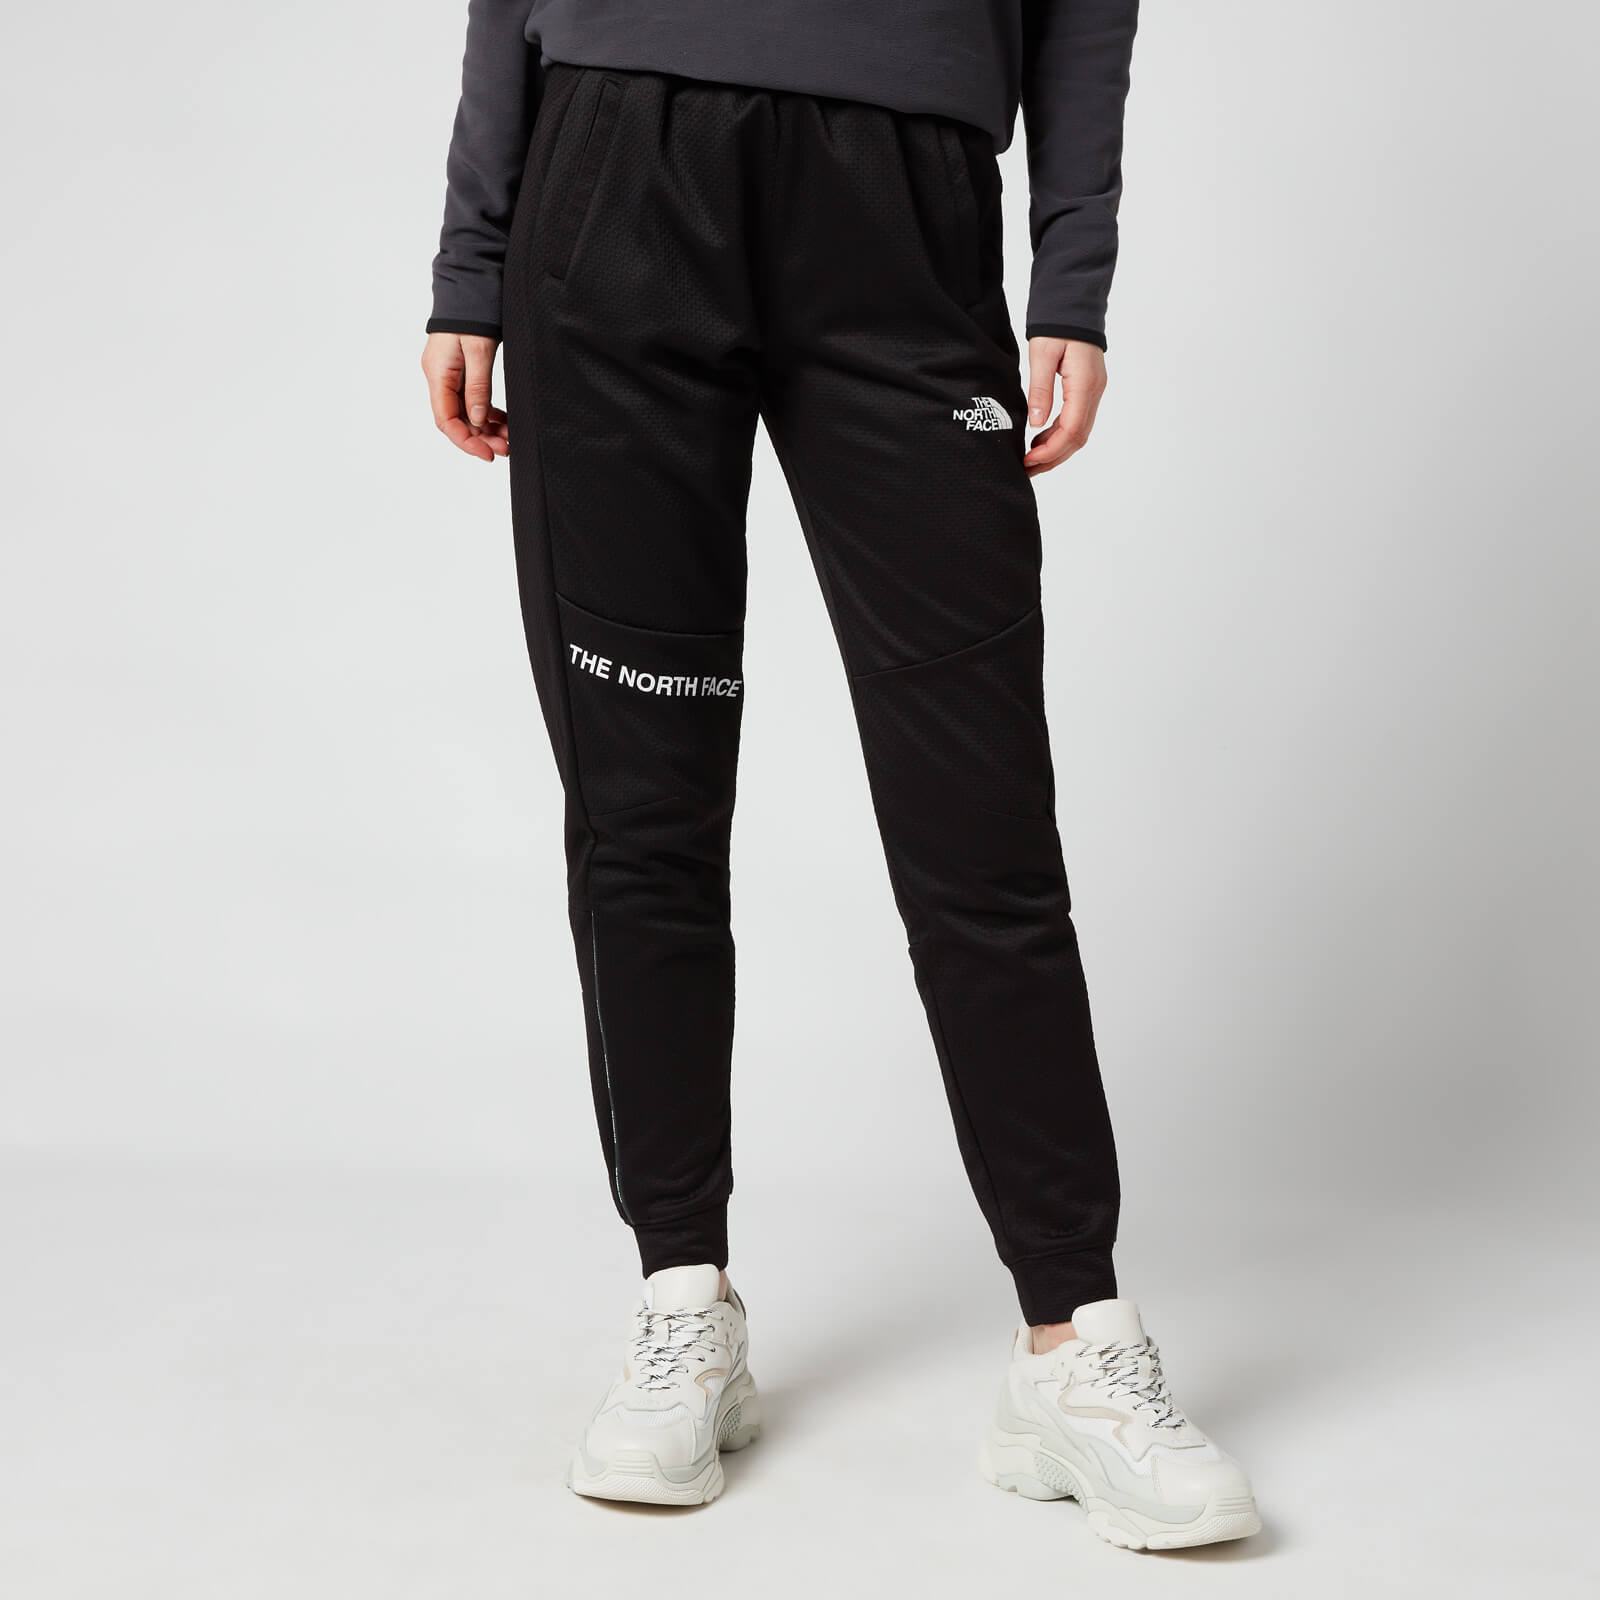 The North Face Women's Women's Mountain Athletic Pants - Black